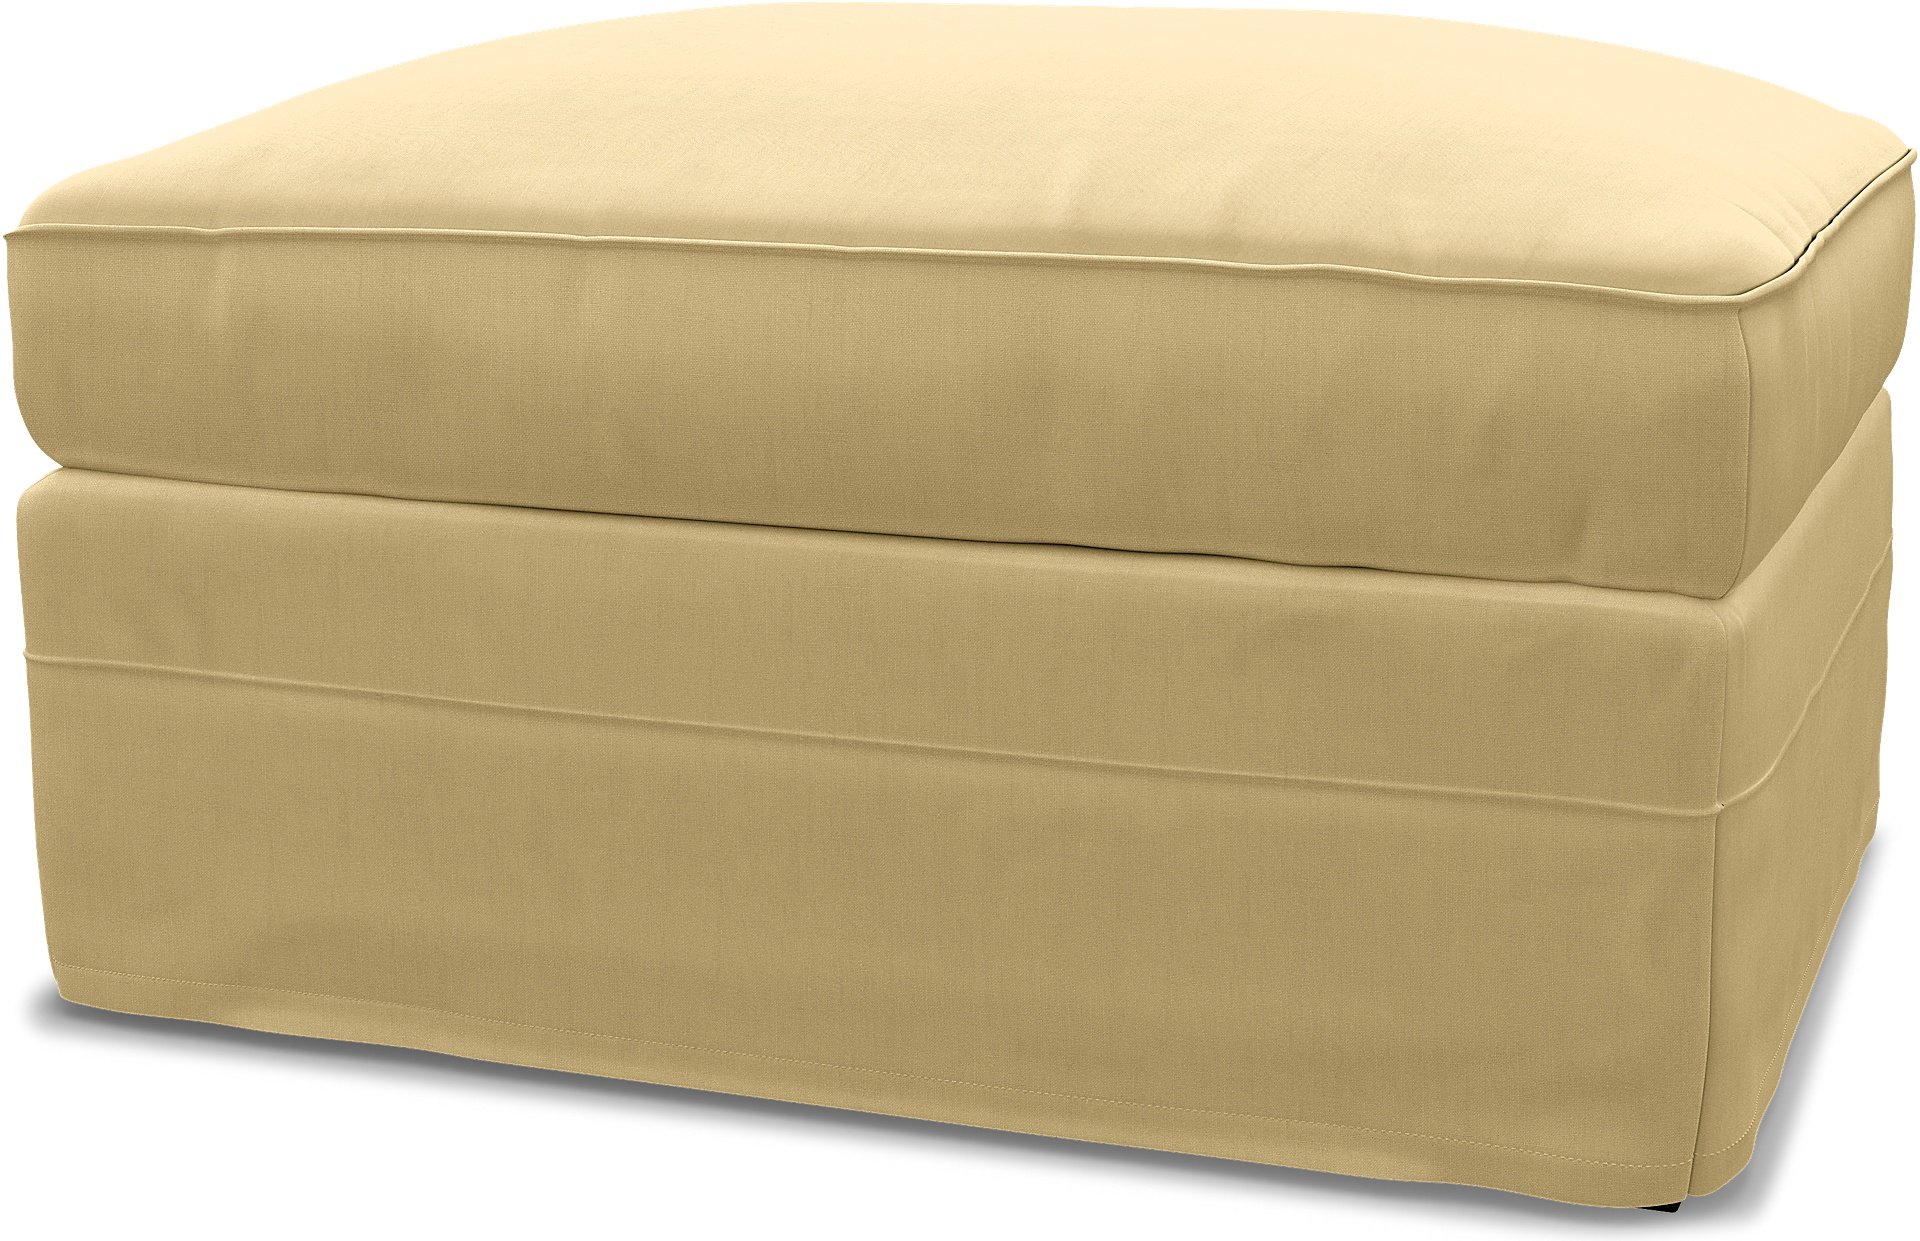 IKEA - Gronlid Footstool with Storage Cover, Straw Yellow, Linen - Bemz